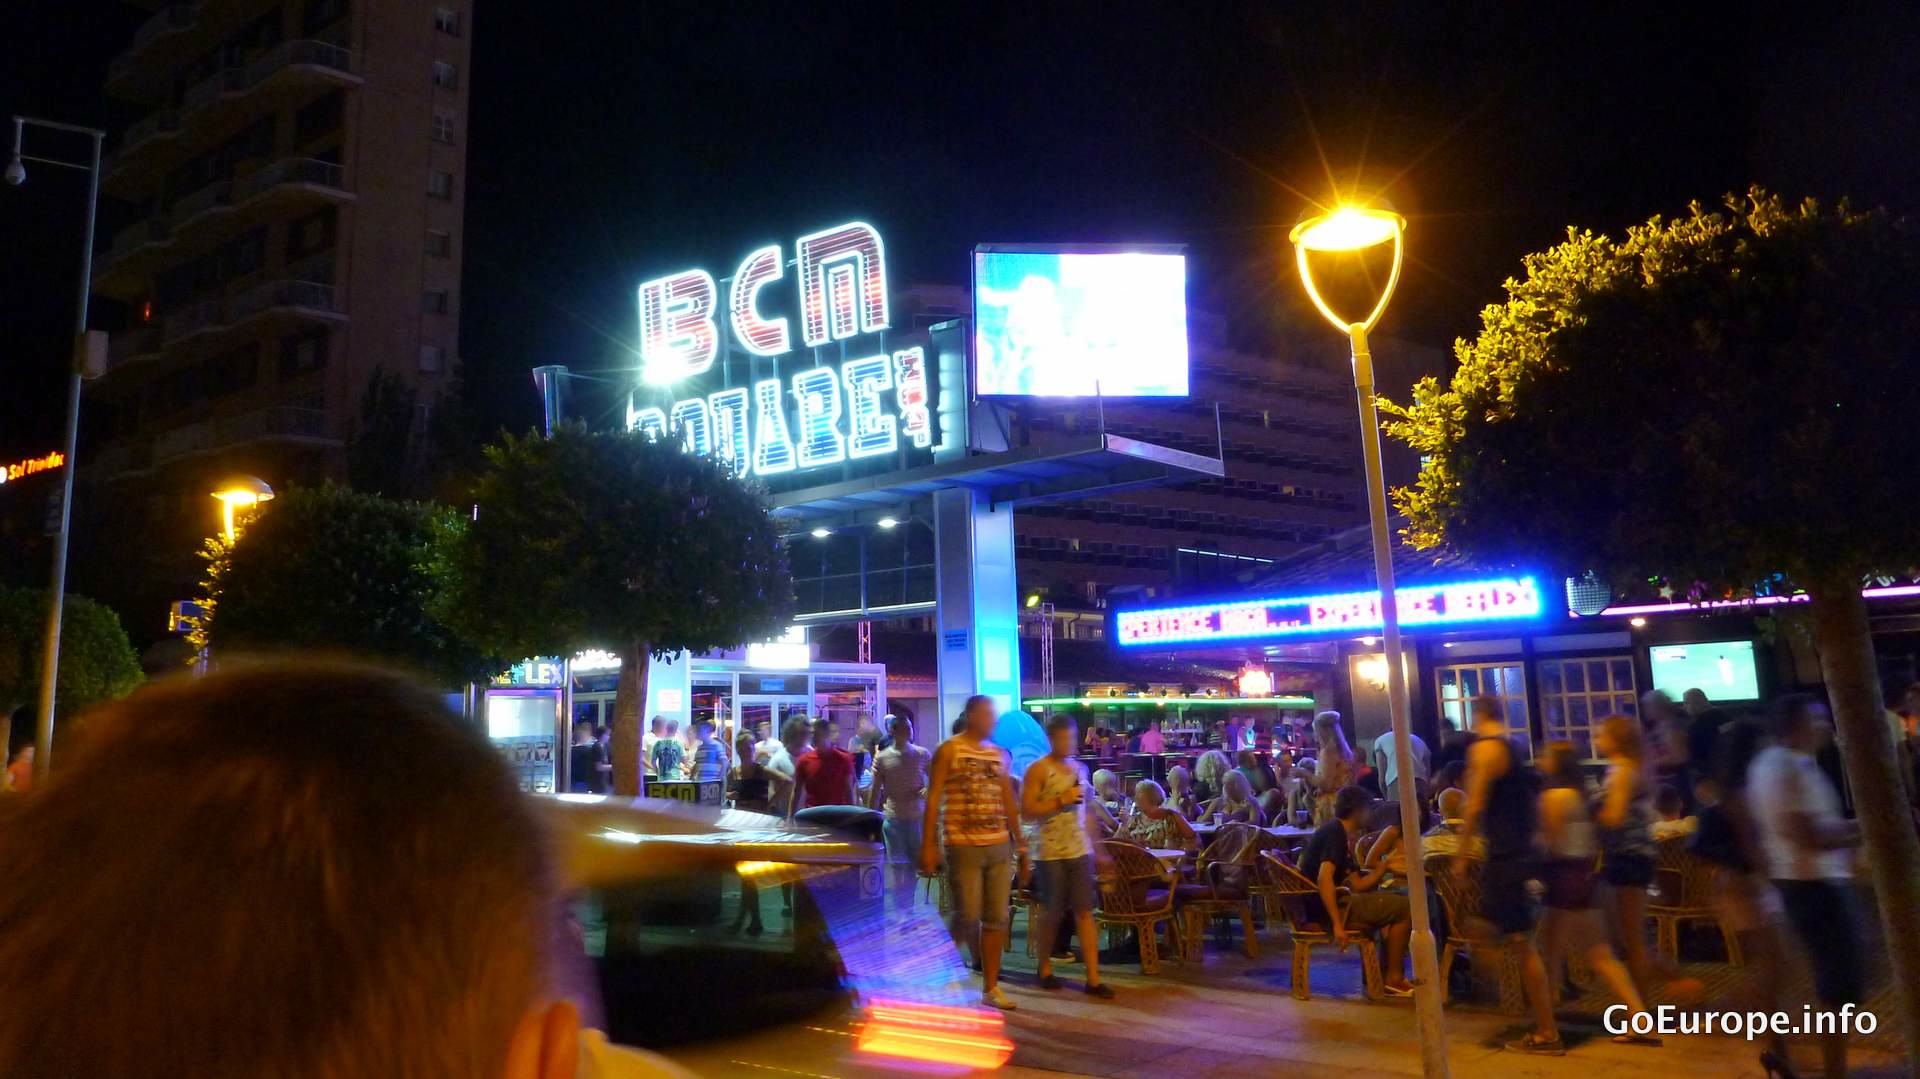 The BCM Square just beside BCM Planet Dance.